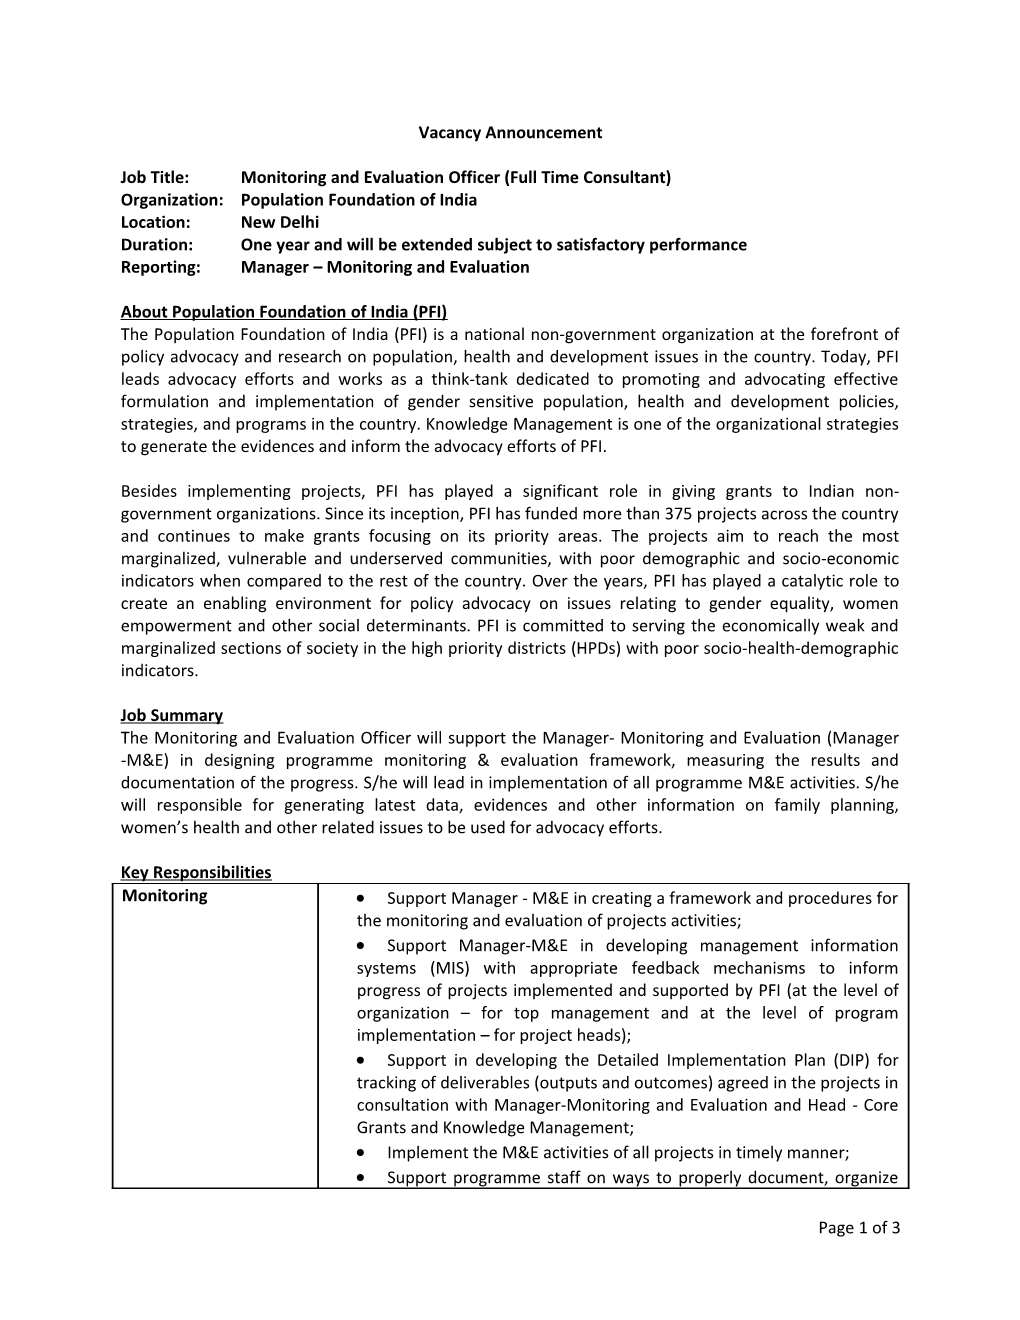 Job Title: Monitoring and Evaluation Officer (Full Time Consultant)